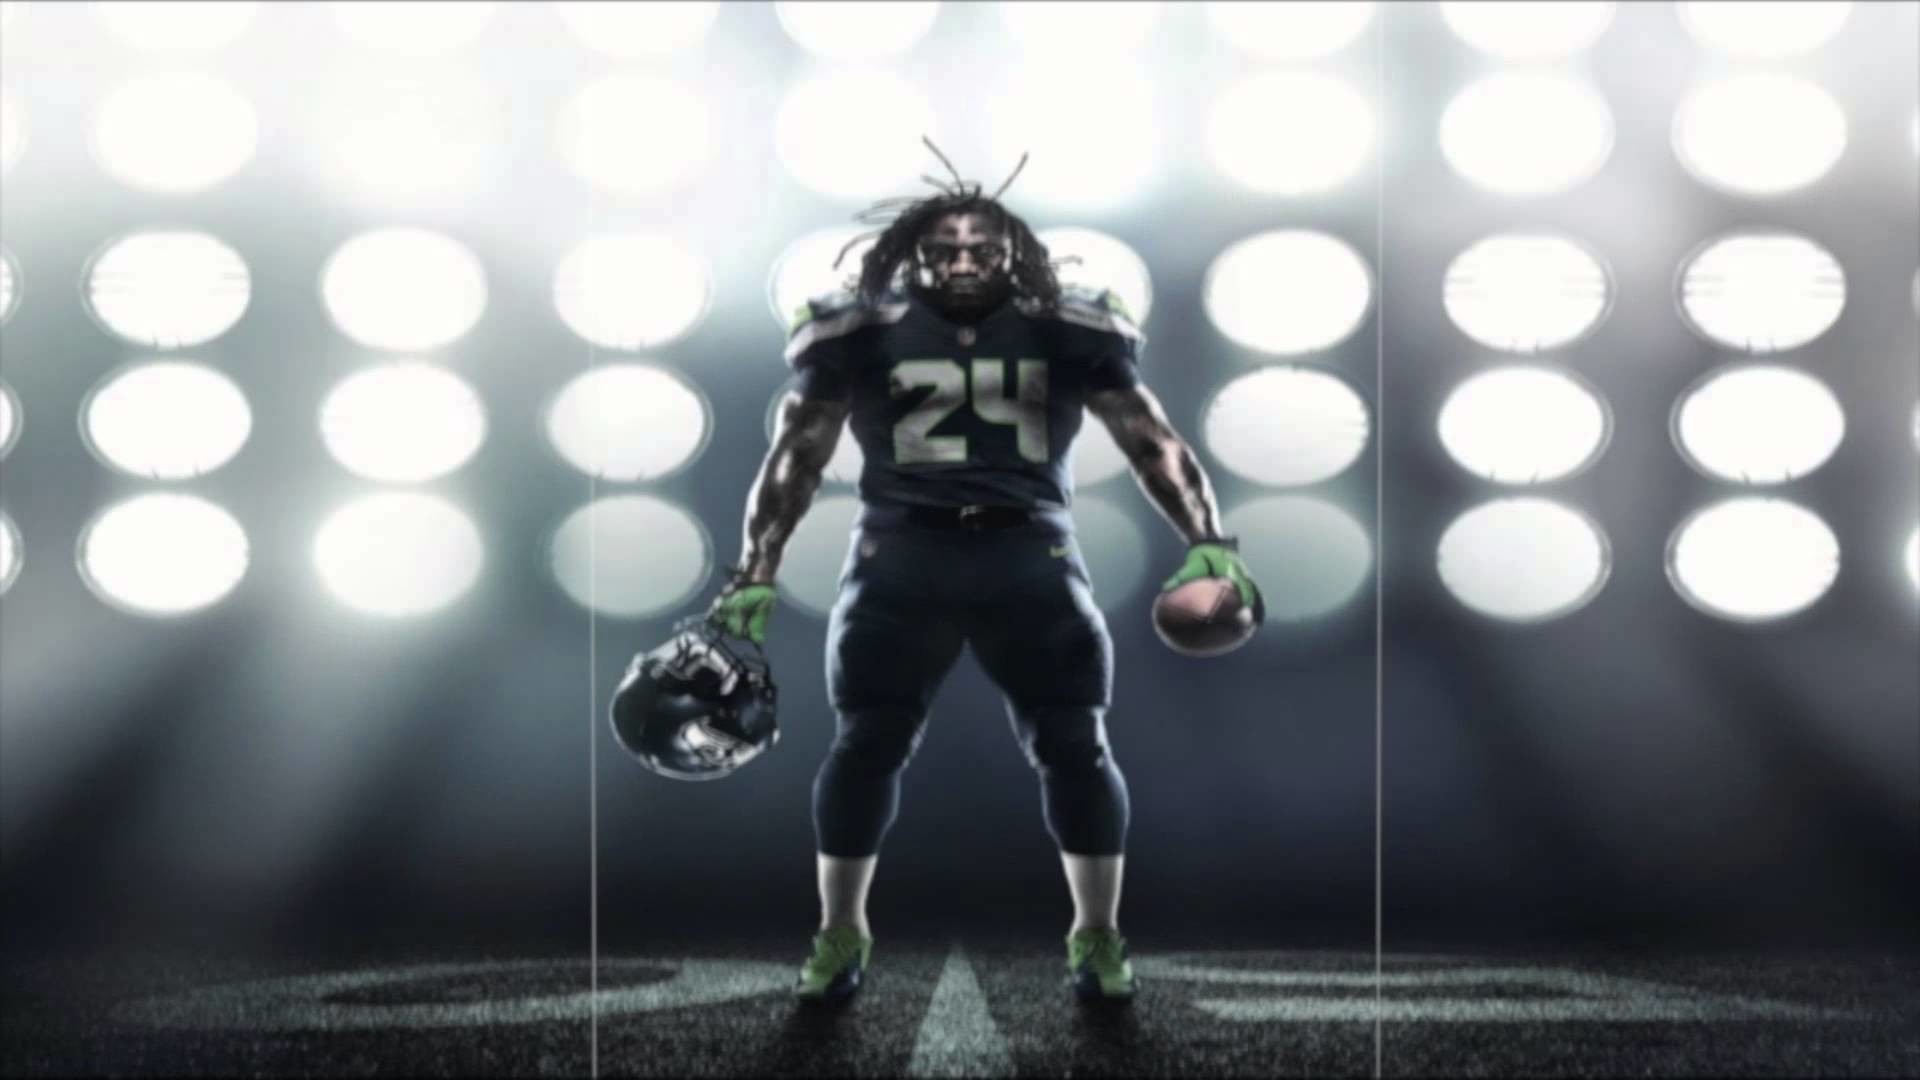 1920x1080 Marshawn Lynch - "Beast Mode" - By Young Rebel (Seattle Seahawks) -  2012/2013 - YouTube